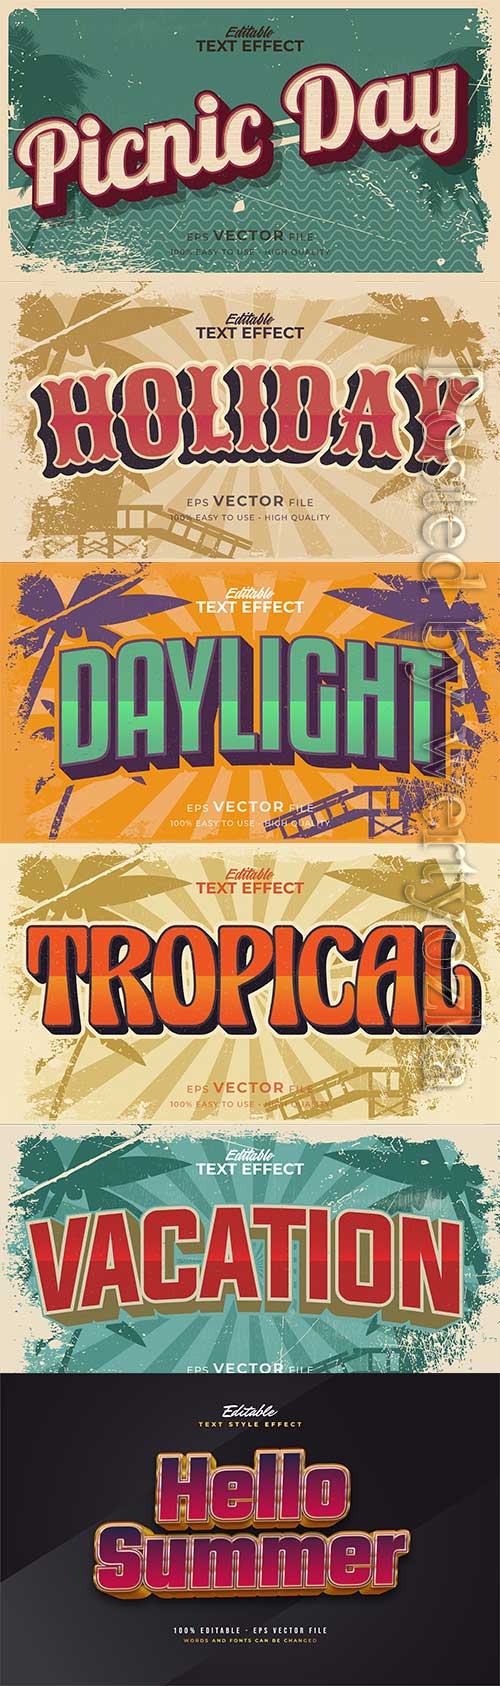 Retro summer holiday text in grunge style theme in vector vol 10